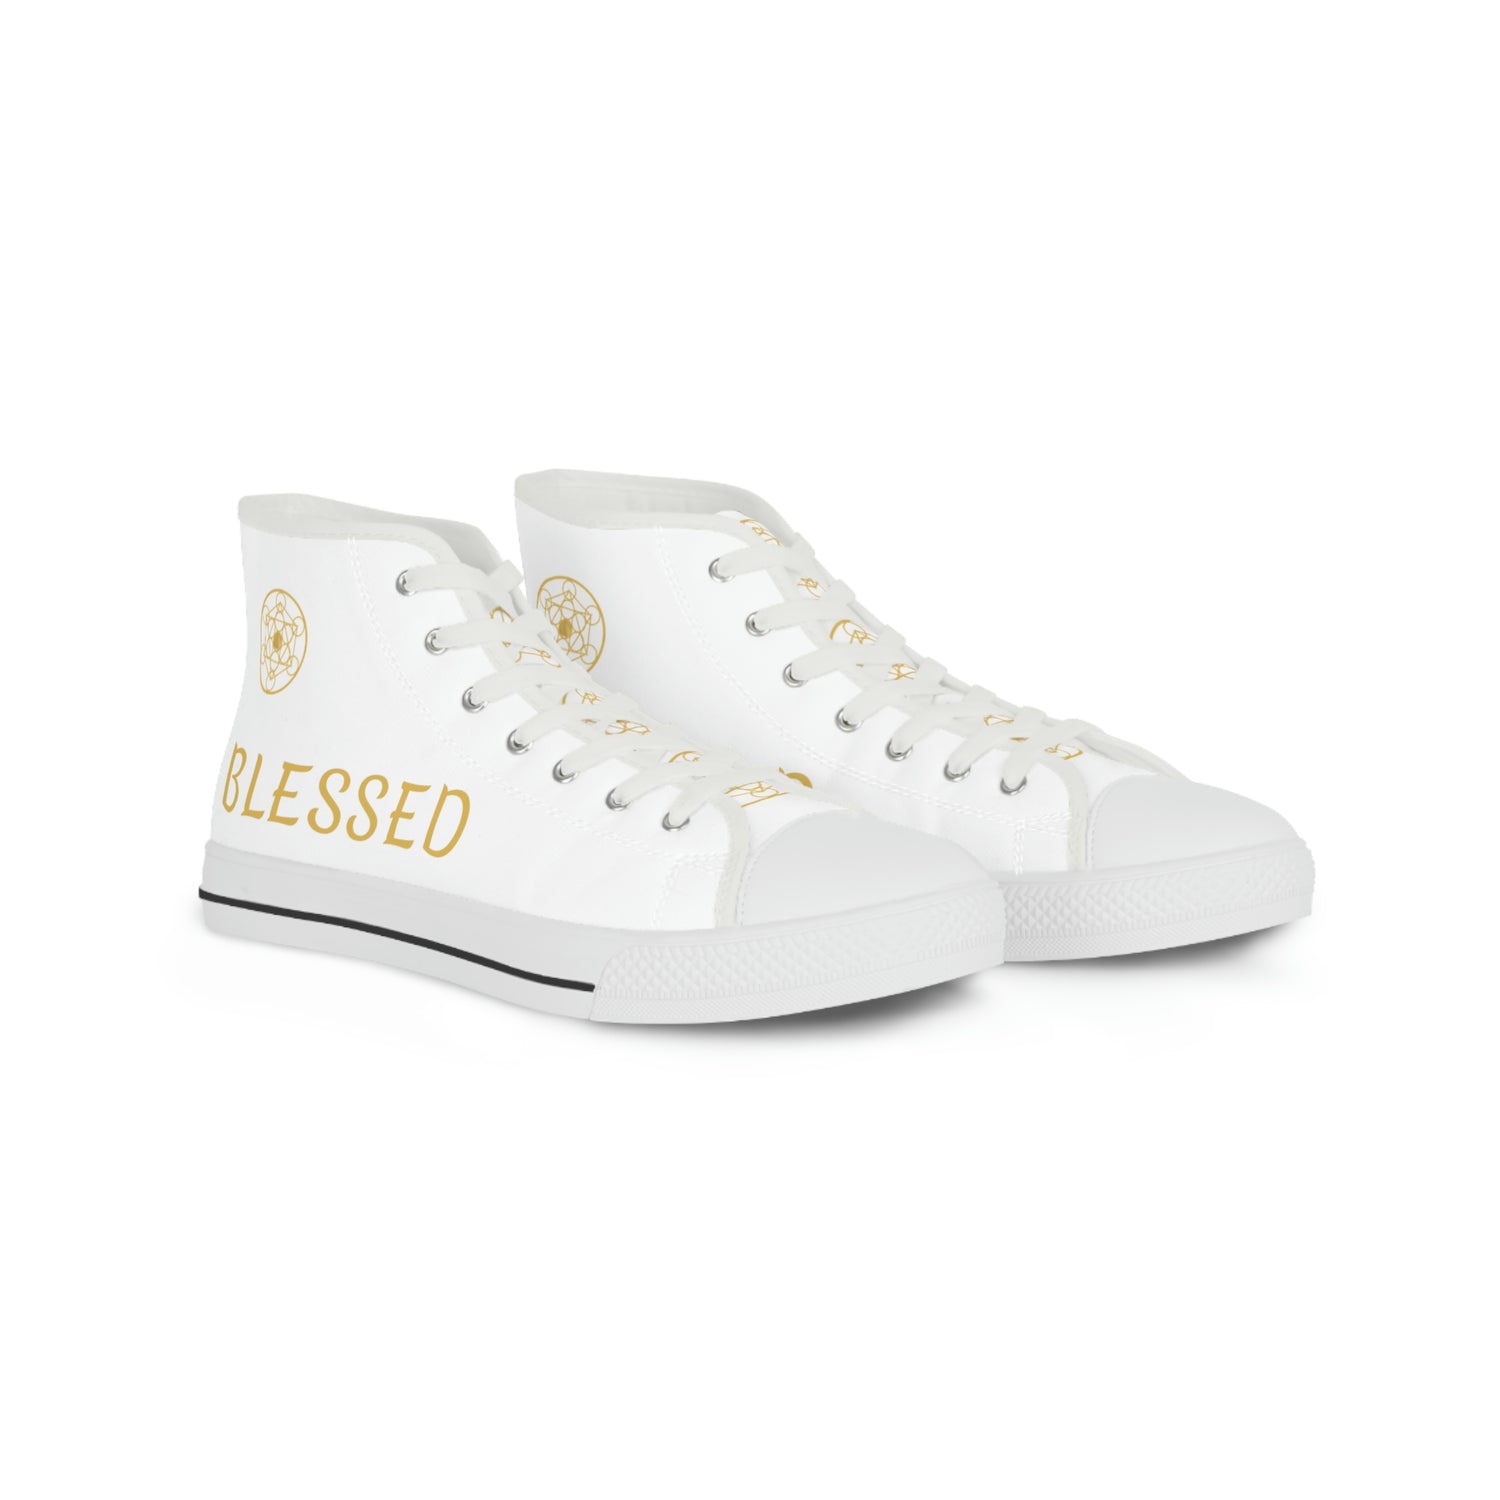 Blessed DYNYSTY - Men's High Top Sneakers - White